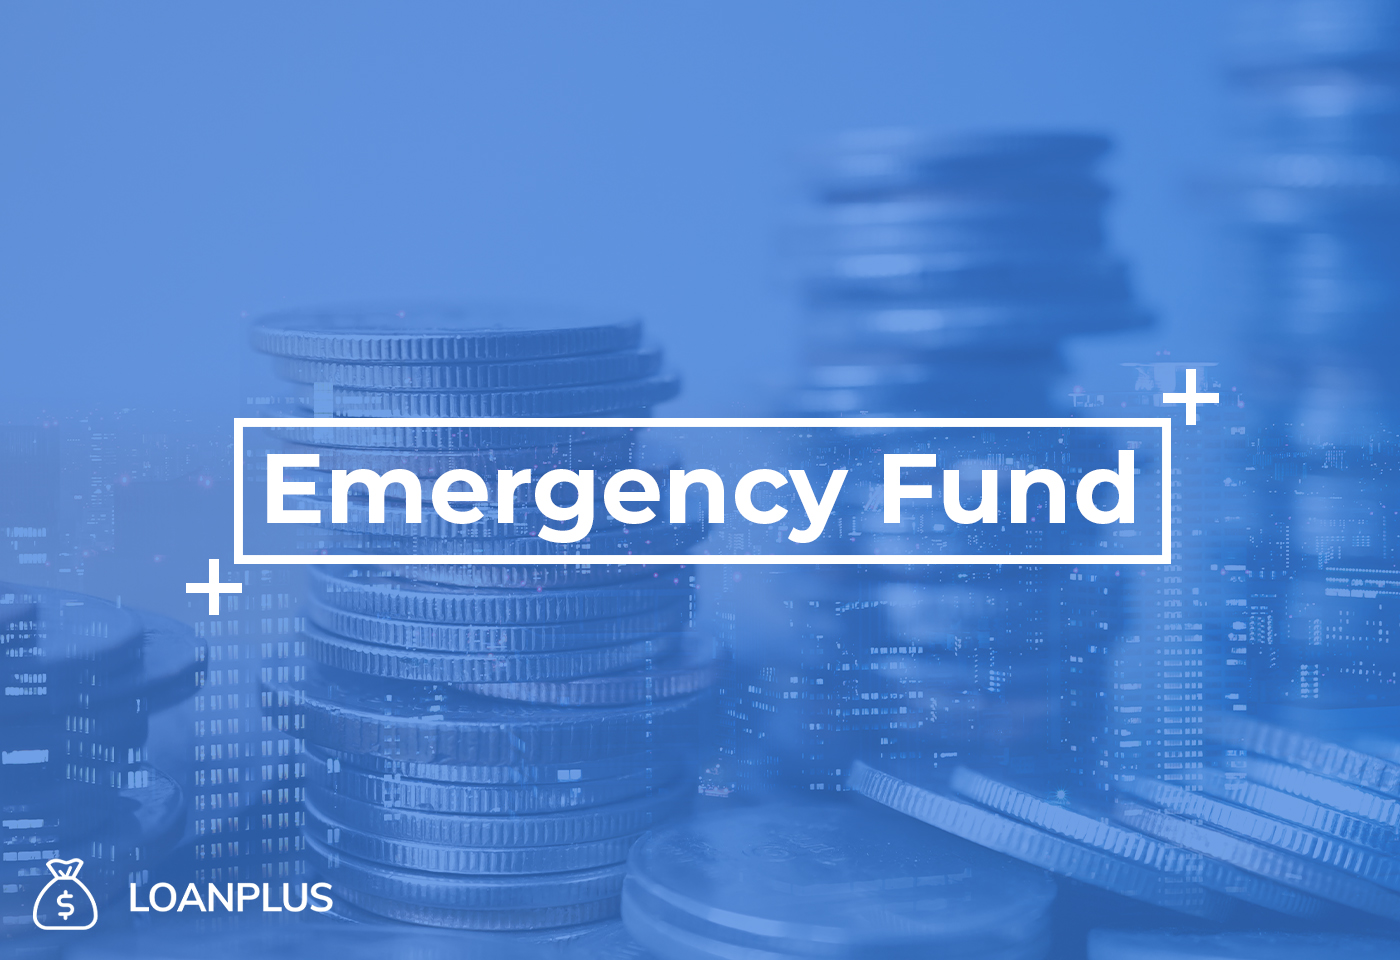 Why an Emergency Fund is Important